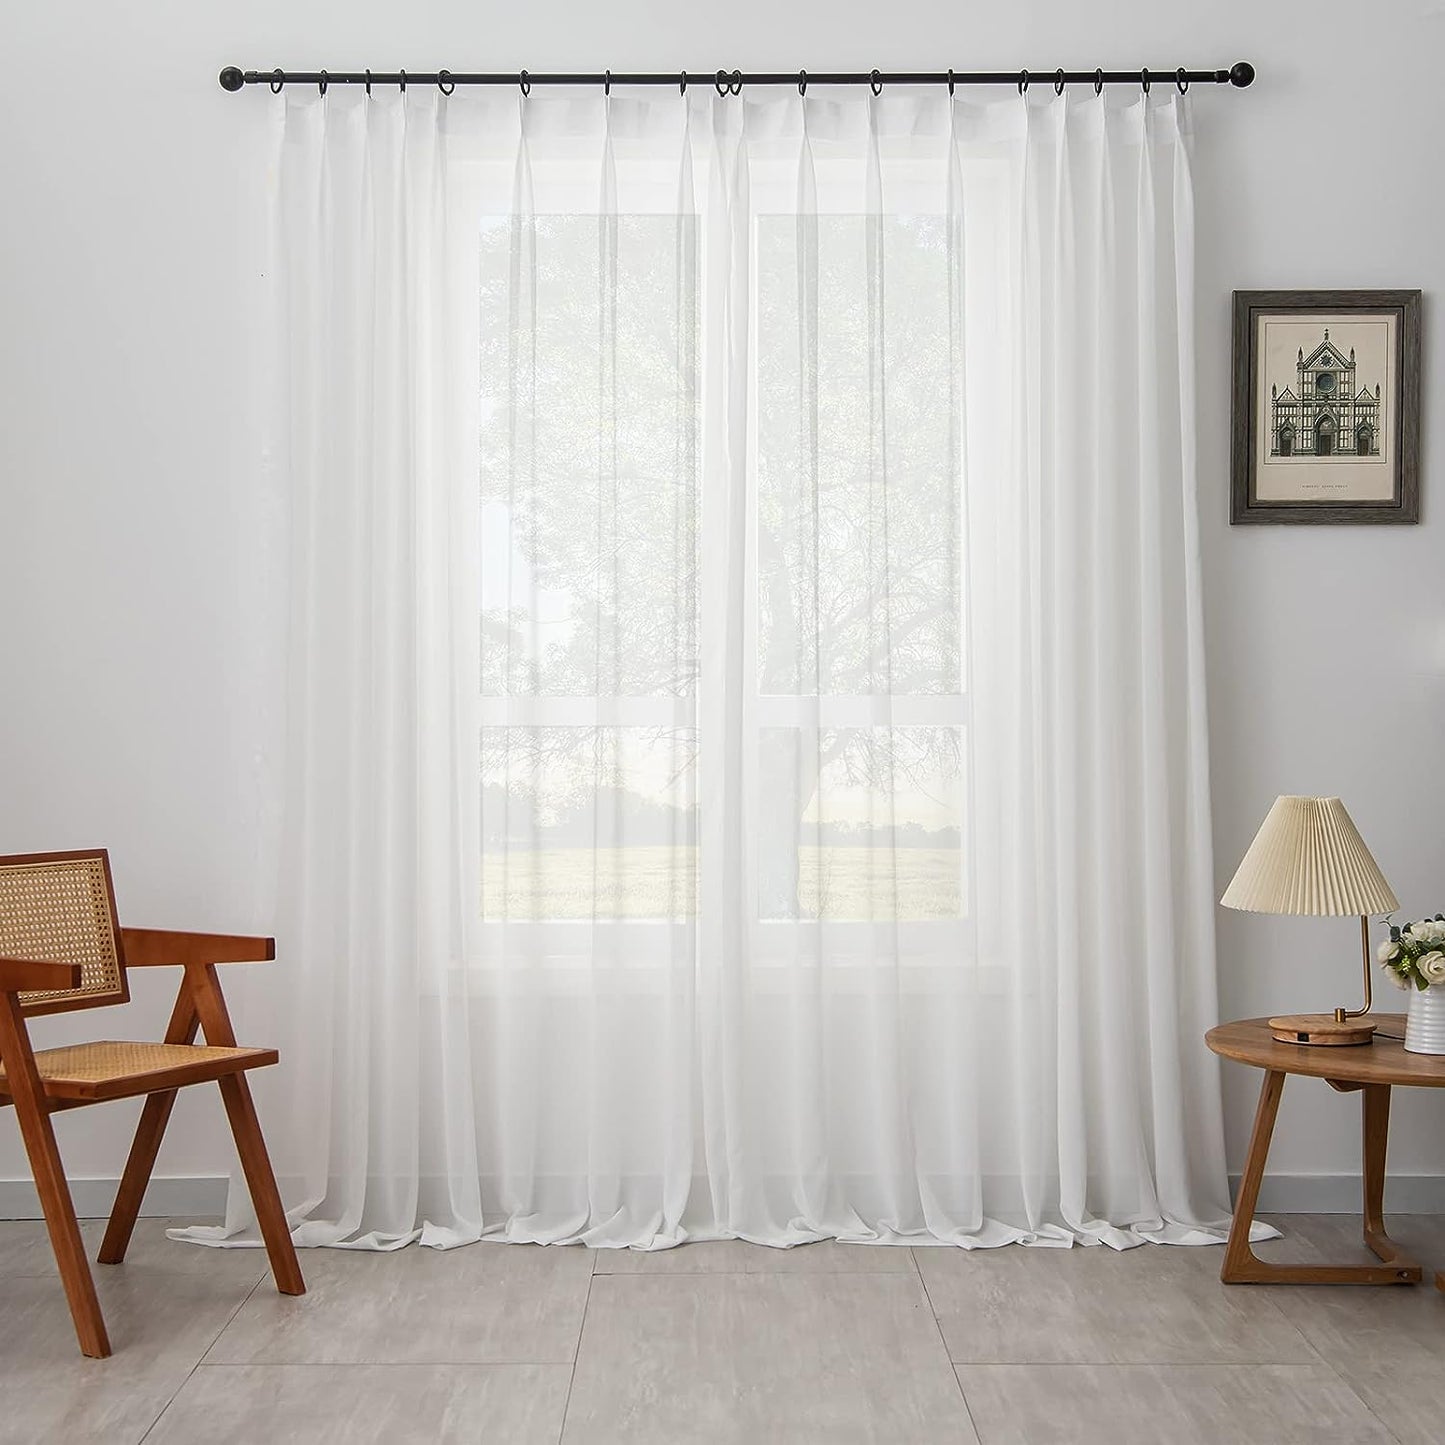 LUGOTAL Pinch Pleated Drapes 108 Inches Long 1 Panel off White Chiffon Sheer Curtains for Living Room and Bedroom Semi-Sheer Light Filtering Curtains & Drapes for Sliding Glass Door, W52 X L108  LUGOTAL   